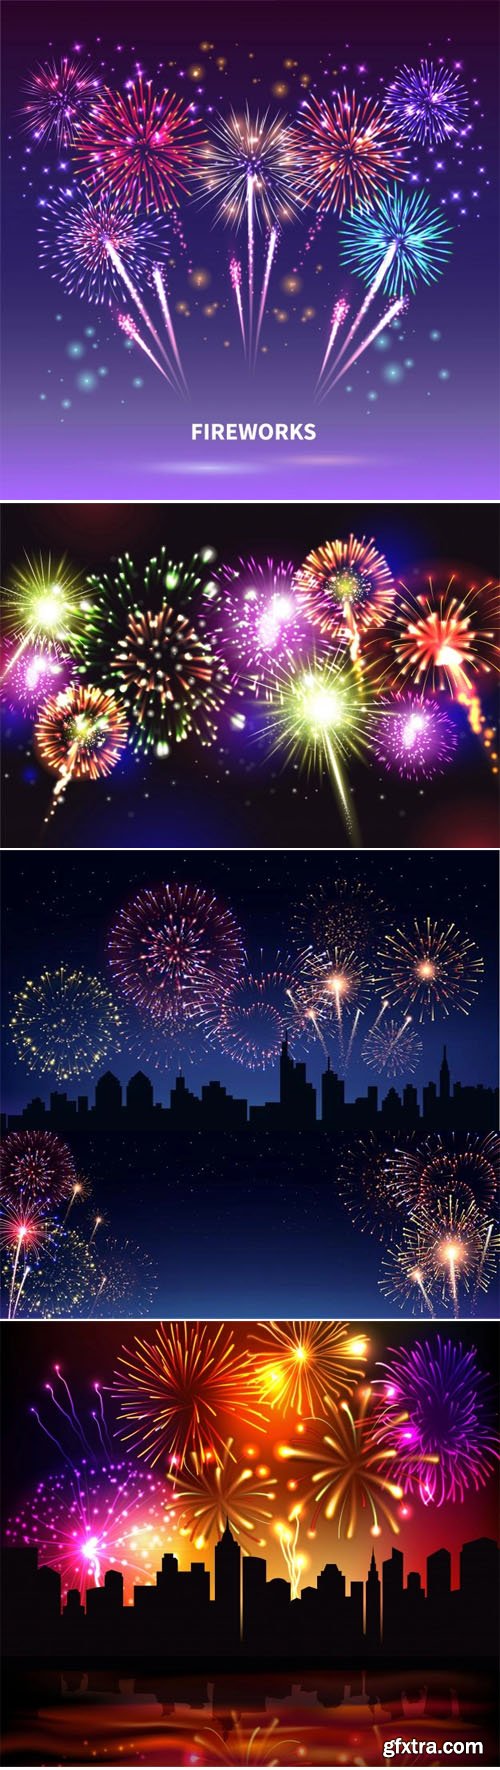 Realistic Festive Fireworks Collection - 9 Vector Templates